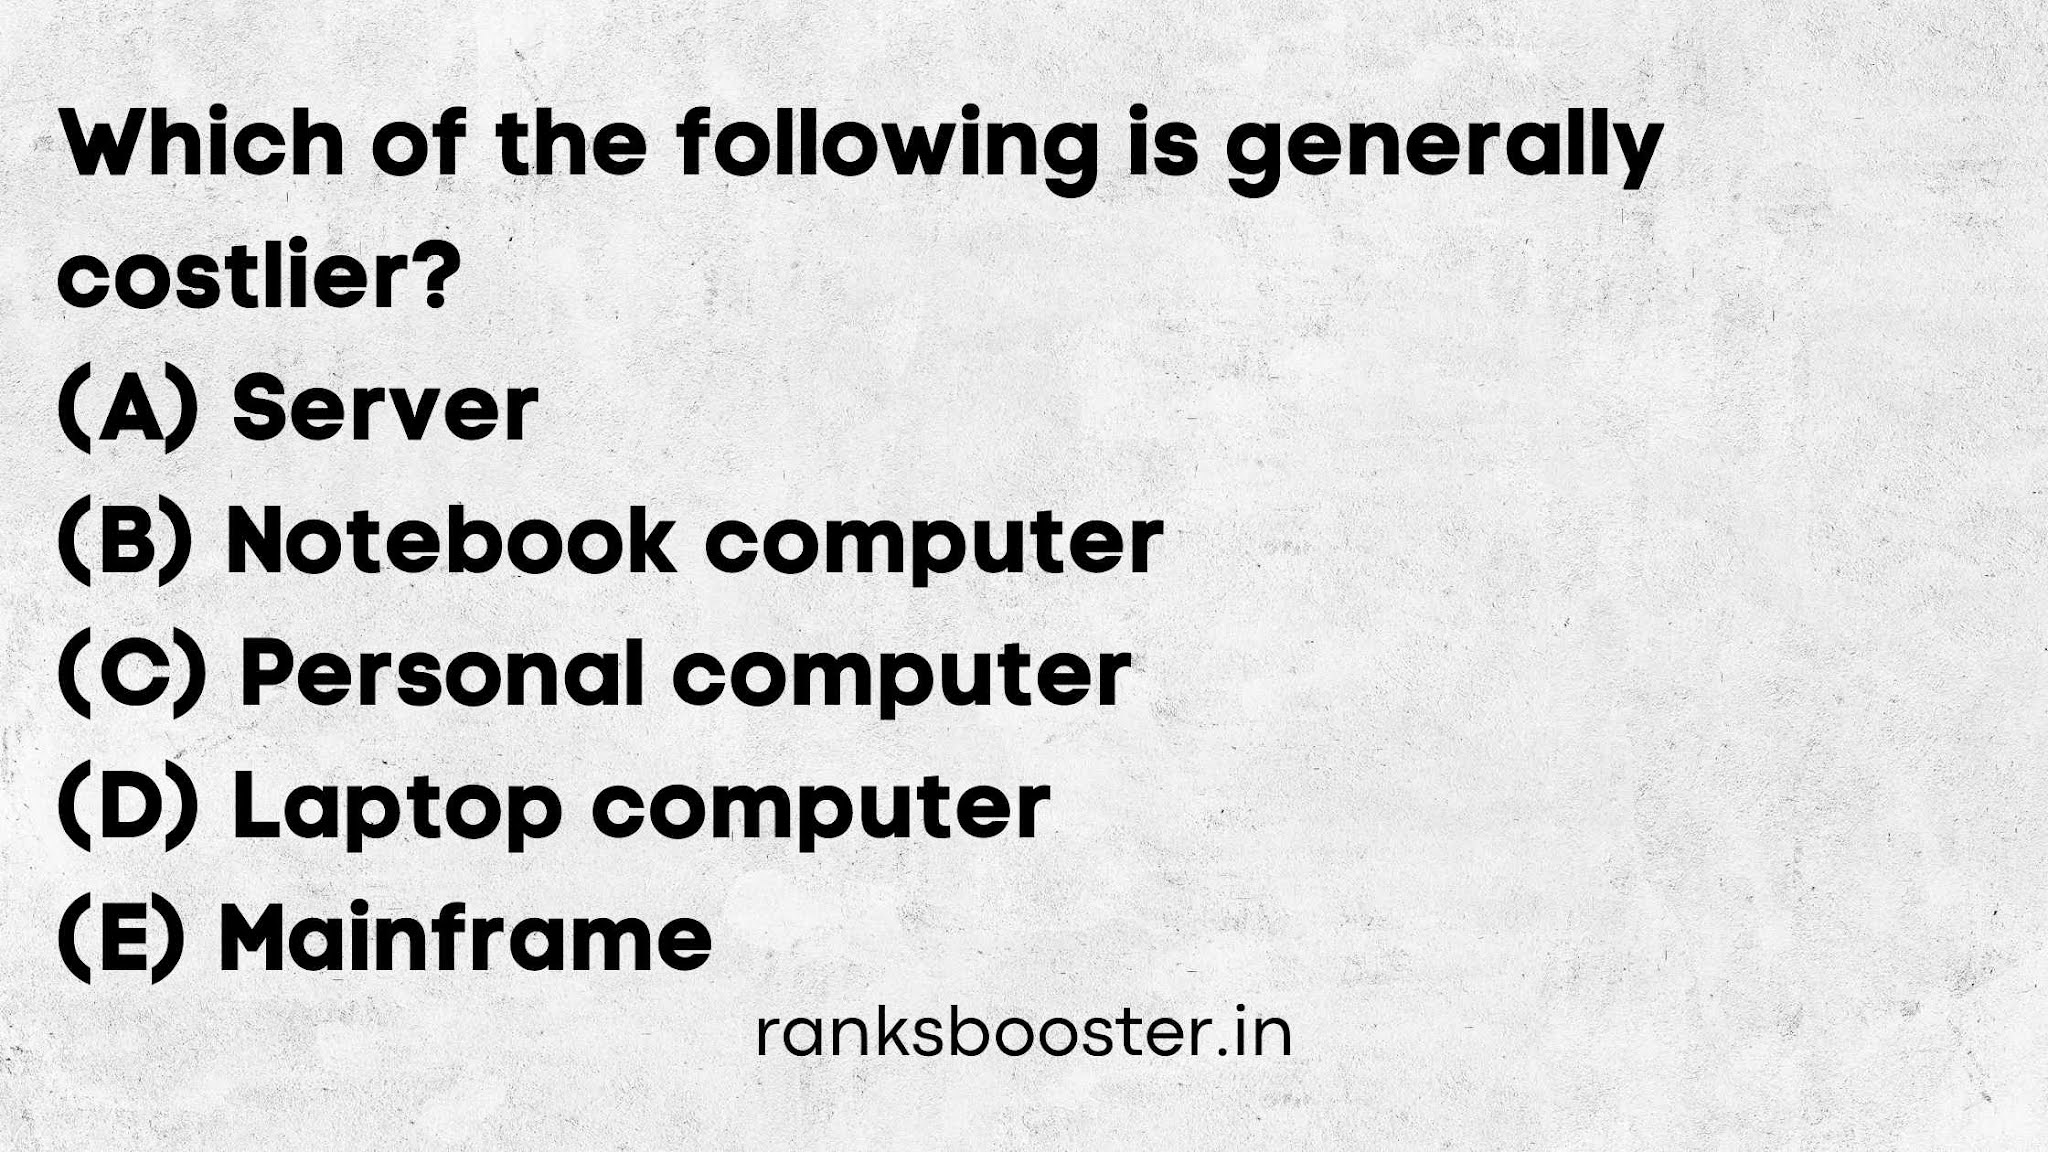 Which of the following is generally costlier? (A) Server (B) Notebook computer (C) Personal computer (D) Laptop computer (E) Mainframe